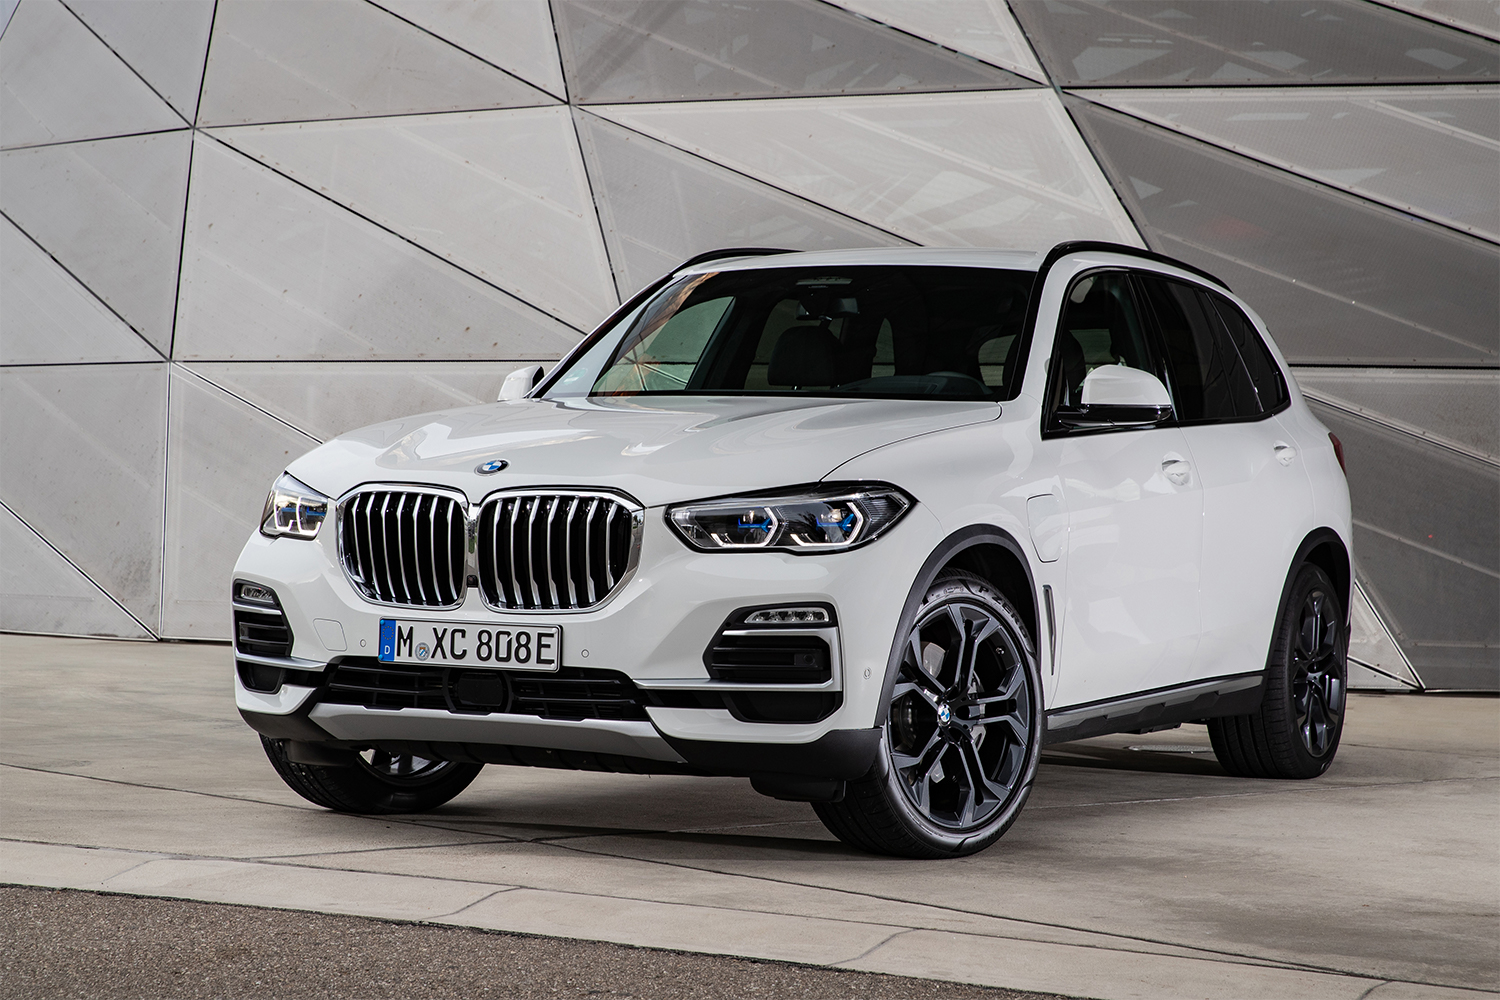 The BMW X5 xDrive45e, one of our favorite vehicles of 2021